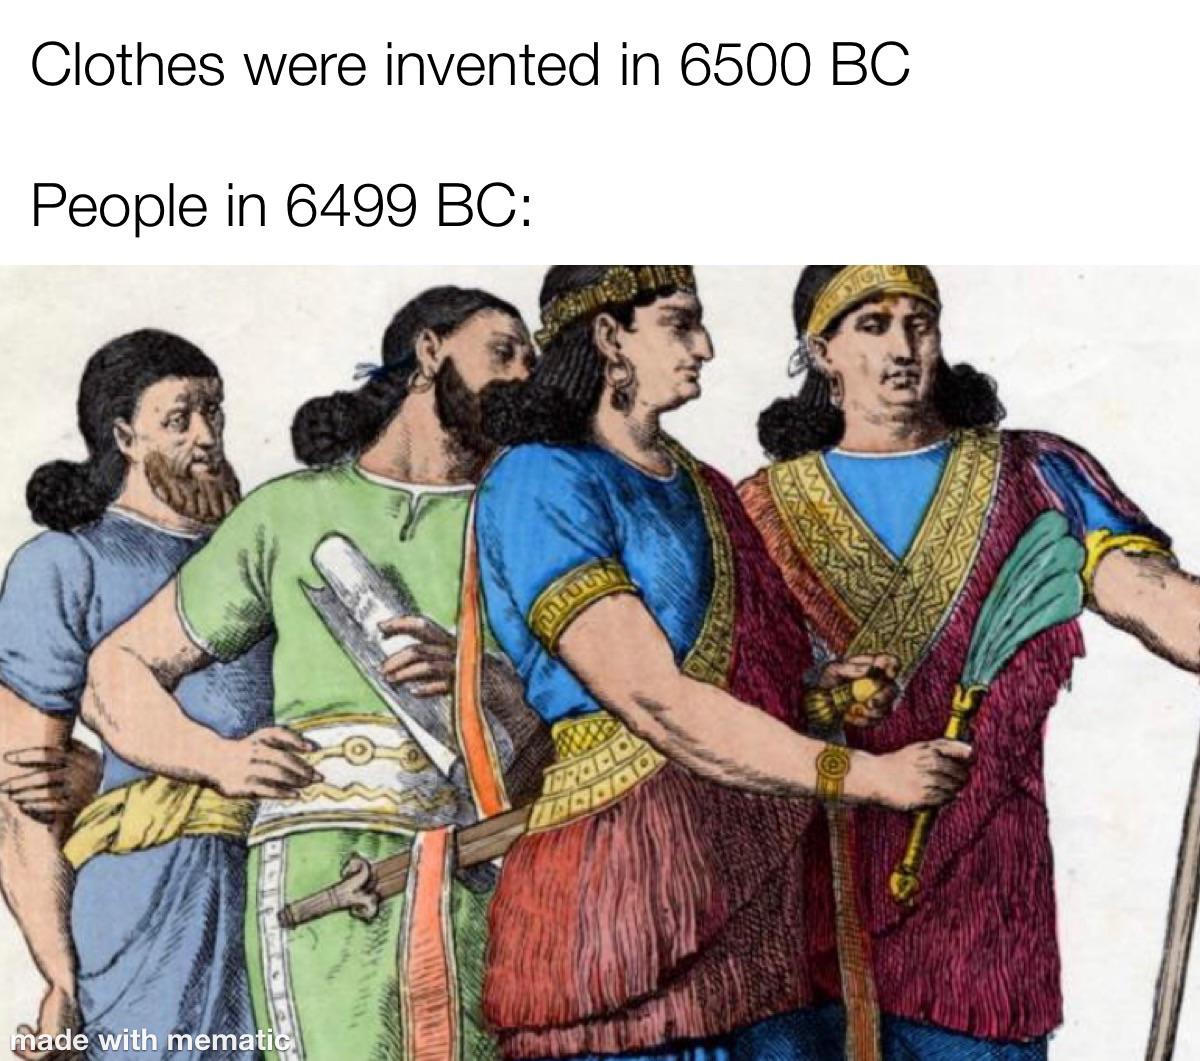 funny memes and pics - greek aristocrats - Clothes were invented in 6500 Bc People in 6499 Bc made with mematic www Froed Marado